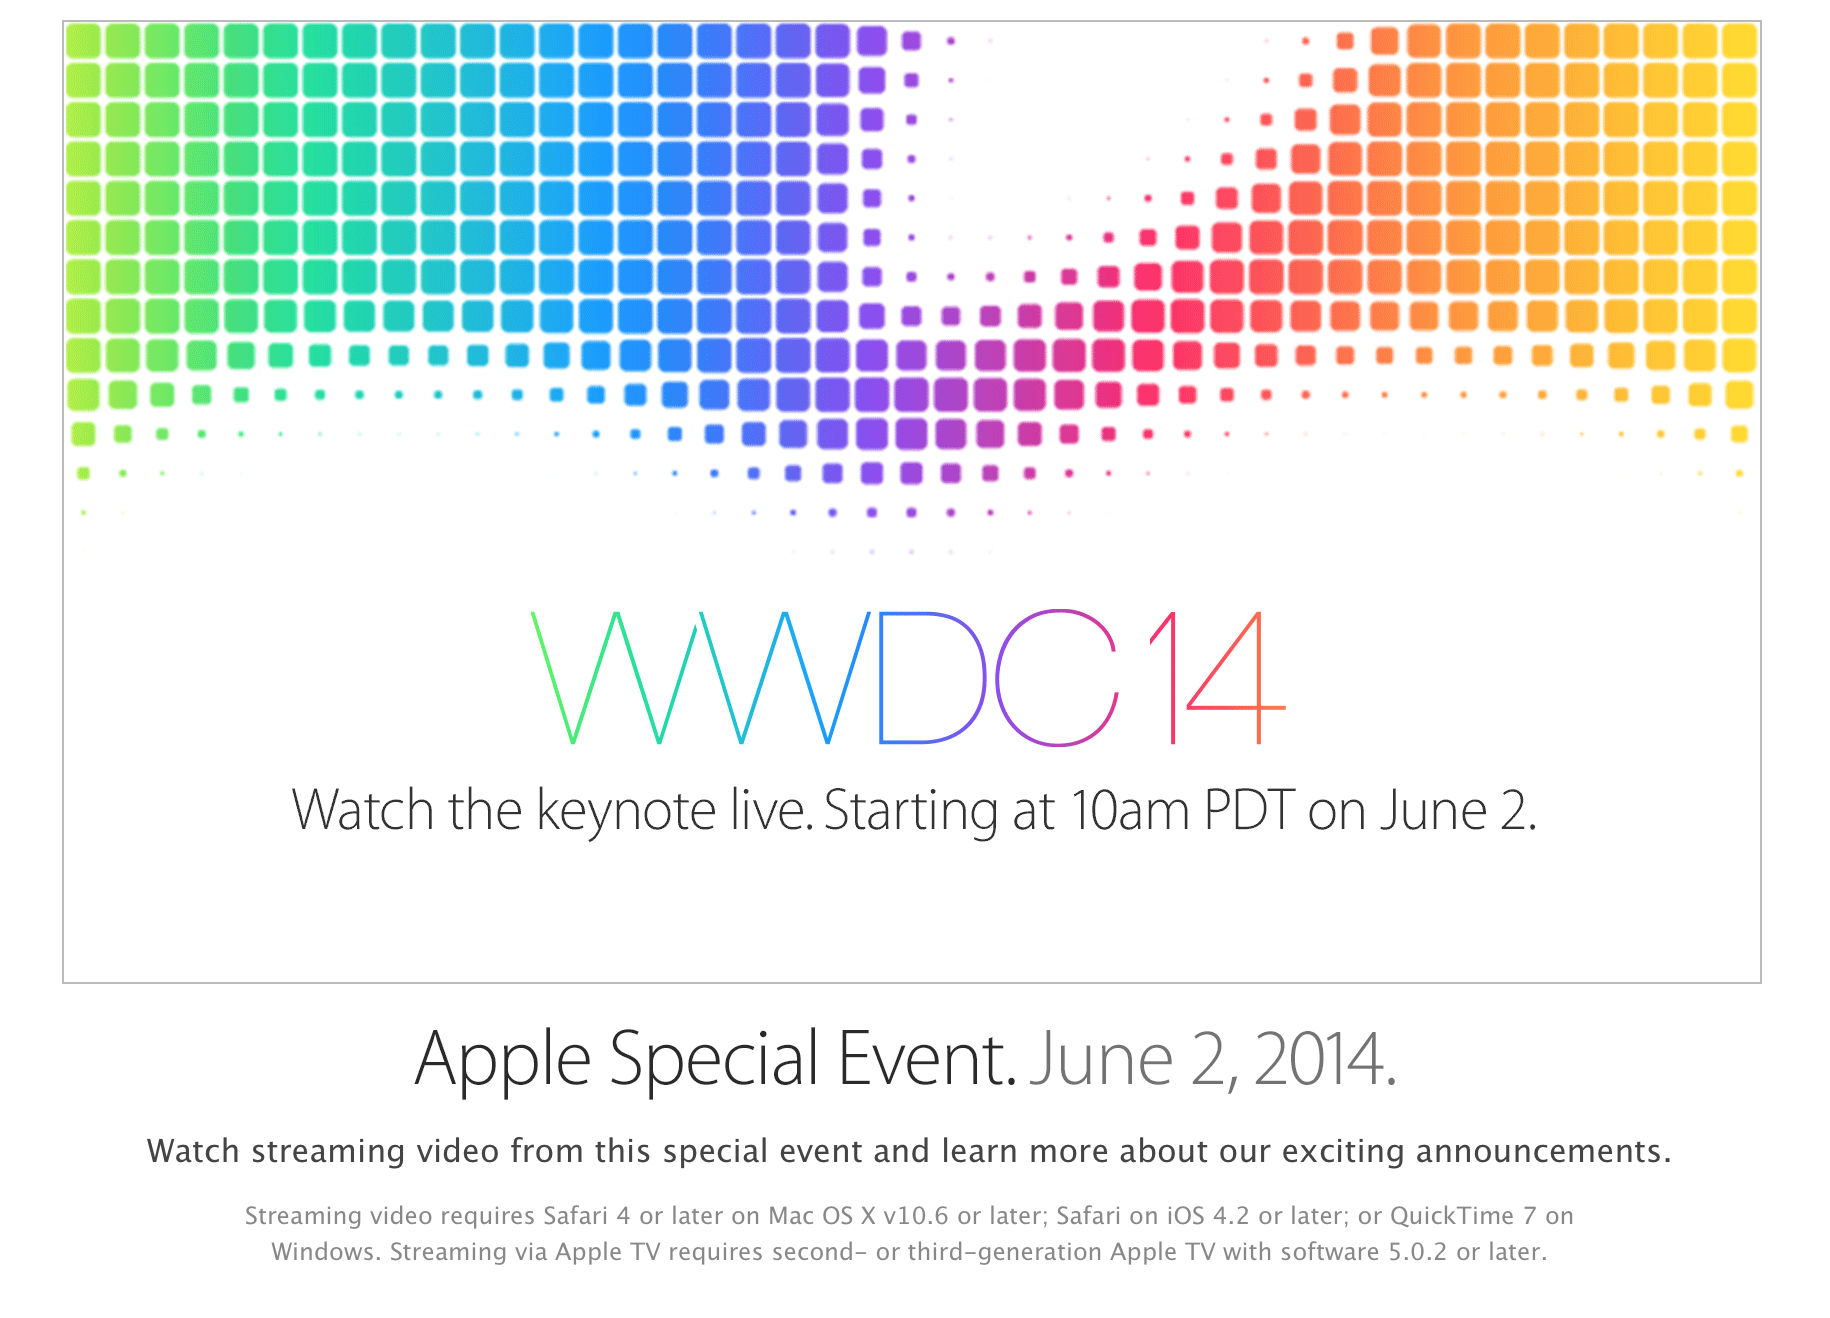 Apple to live stream 'exciting' WWDC keynote for everyone to watch